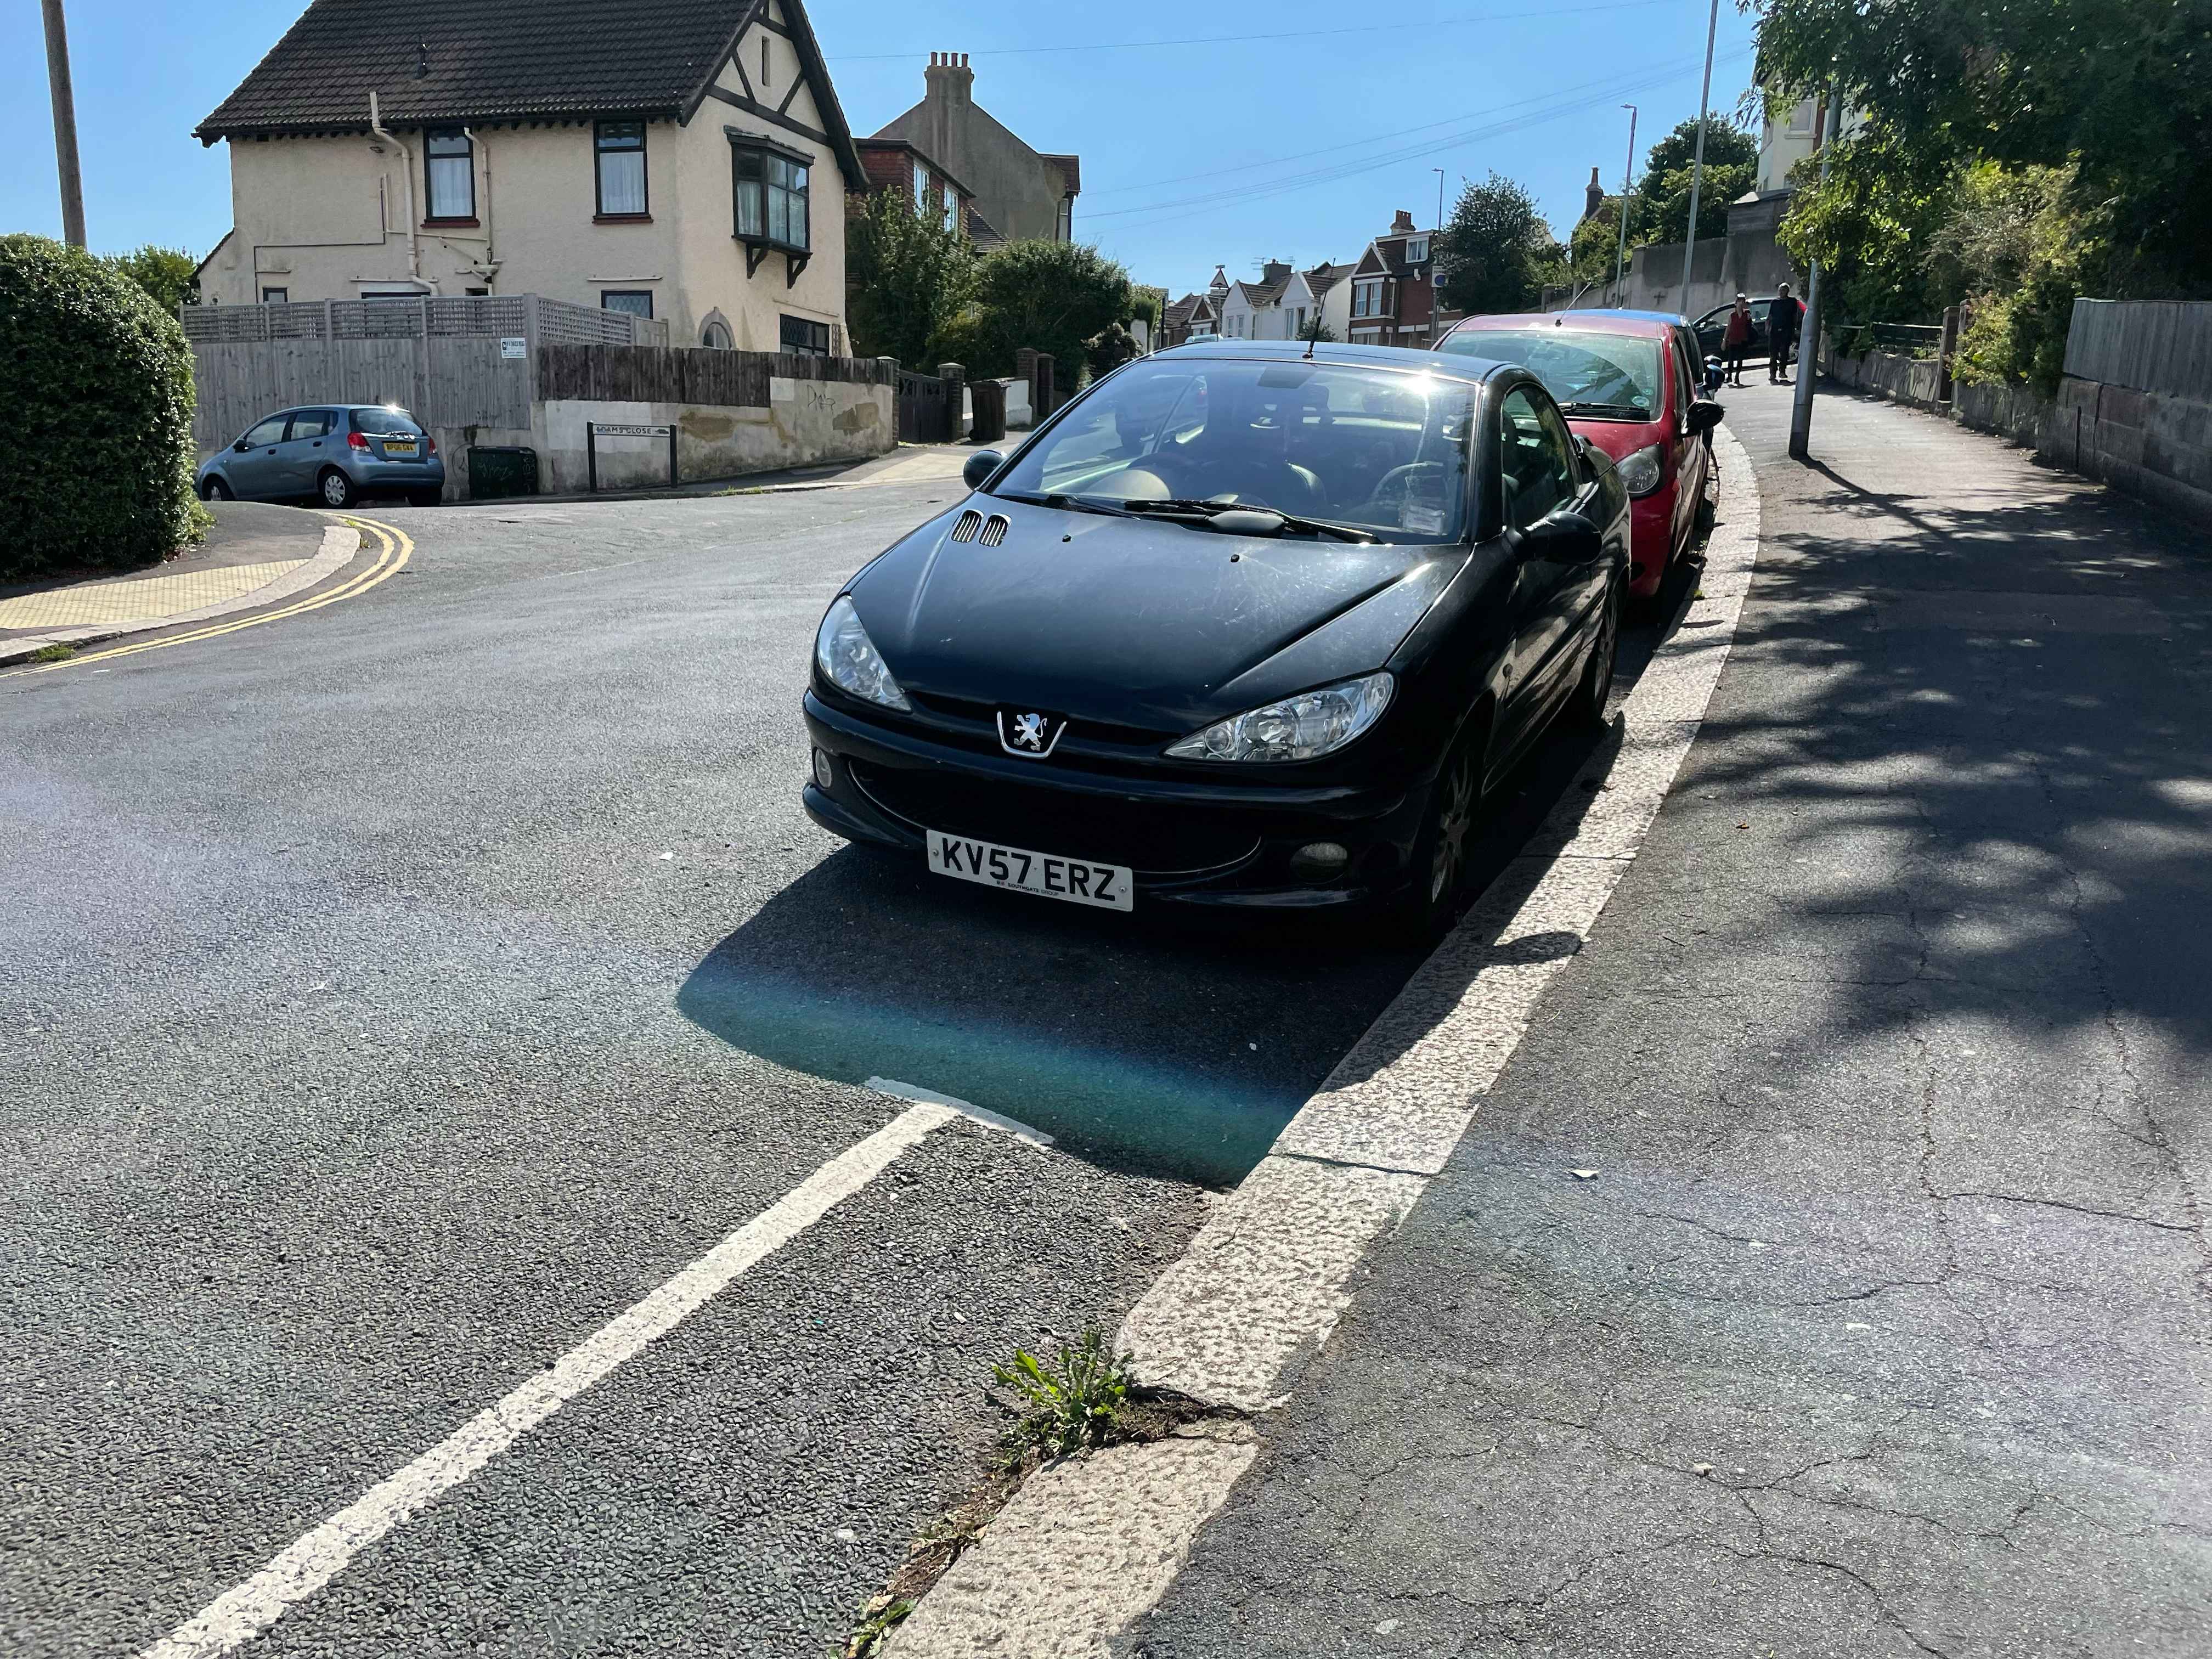 Photograph of KV57 ERZ - a Black Peugeot 206 parked in Hollingdean by a non-resident. The third of eight photographs supplied by the residents of Hollingdean.